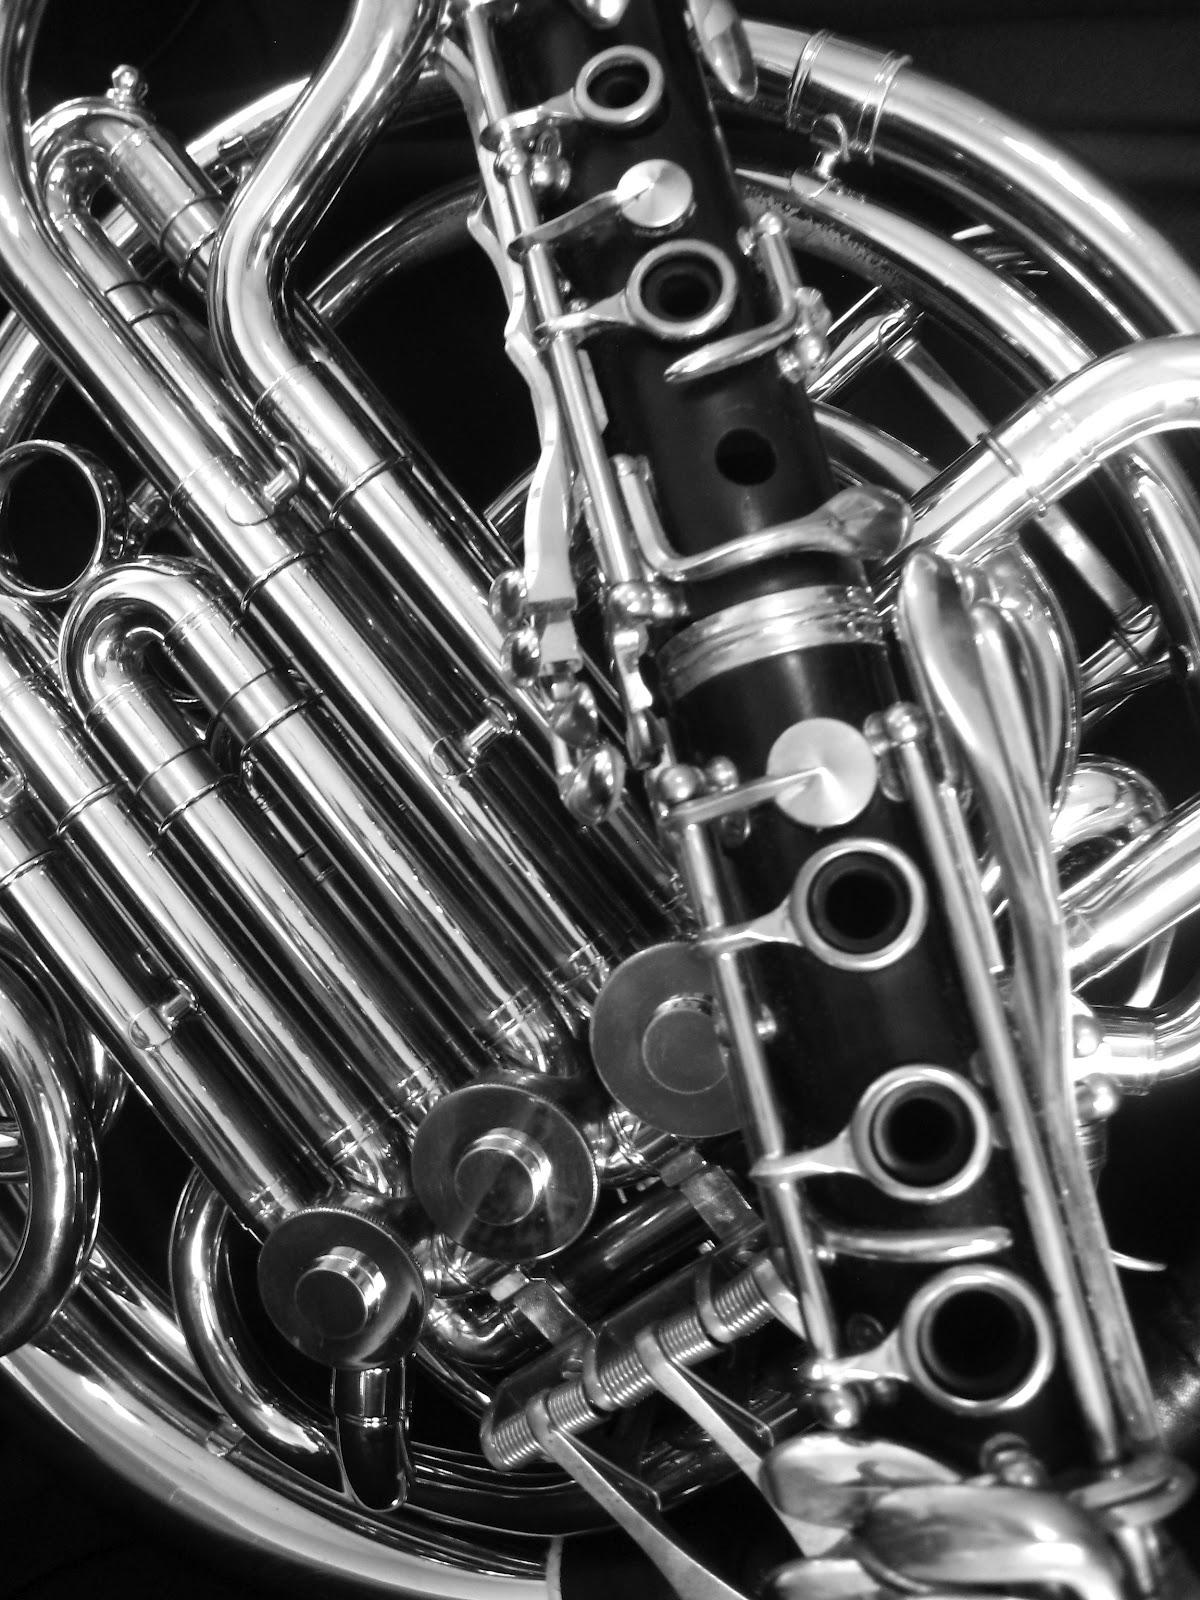 Spirals & Spatulas: Clarinet Photo, French Horn Photo, and Piano